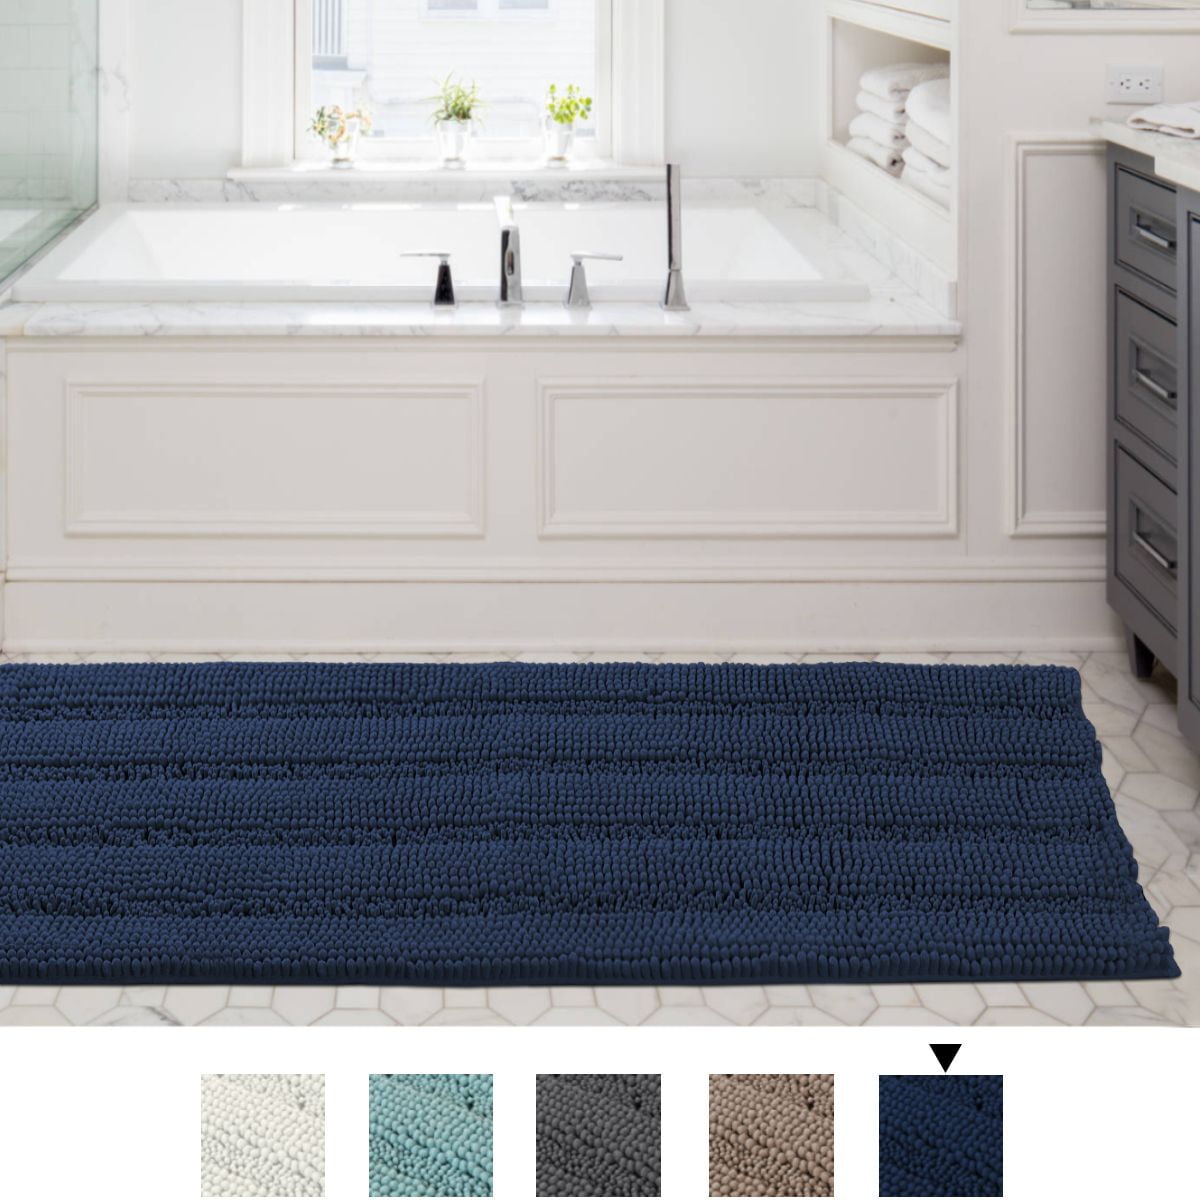 Shag Memory Foam Bathmat - 58-Inch by 24-Inch Runner with Non-Slip Backing  - Absorbent High-Pile Chenille Bathroom Rug by Lavish Home (Gray)